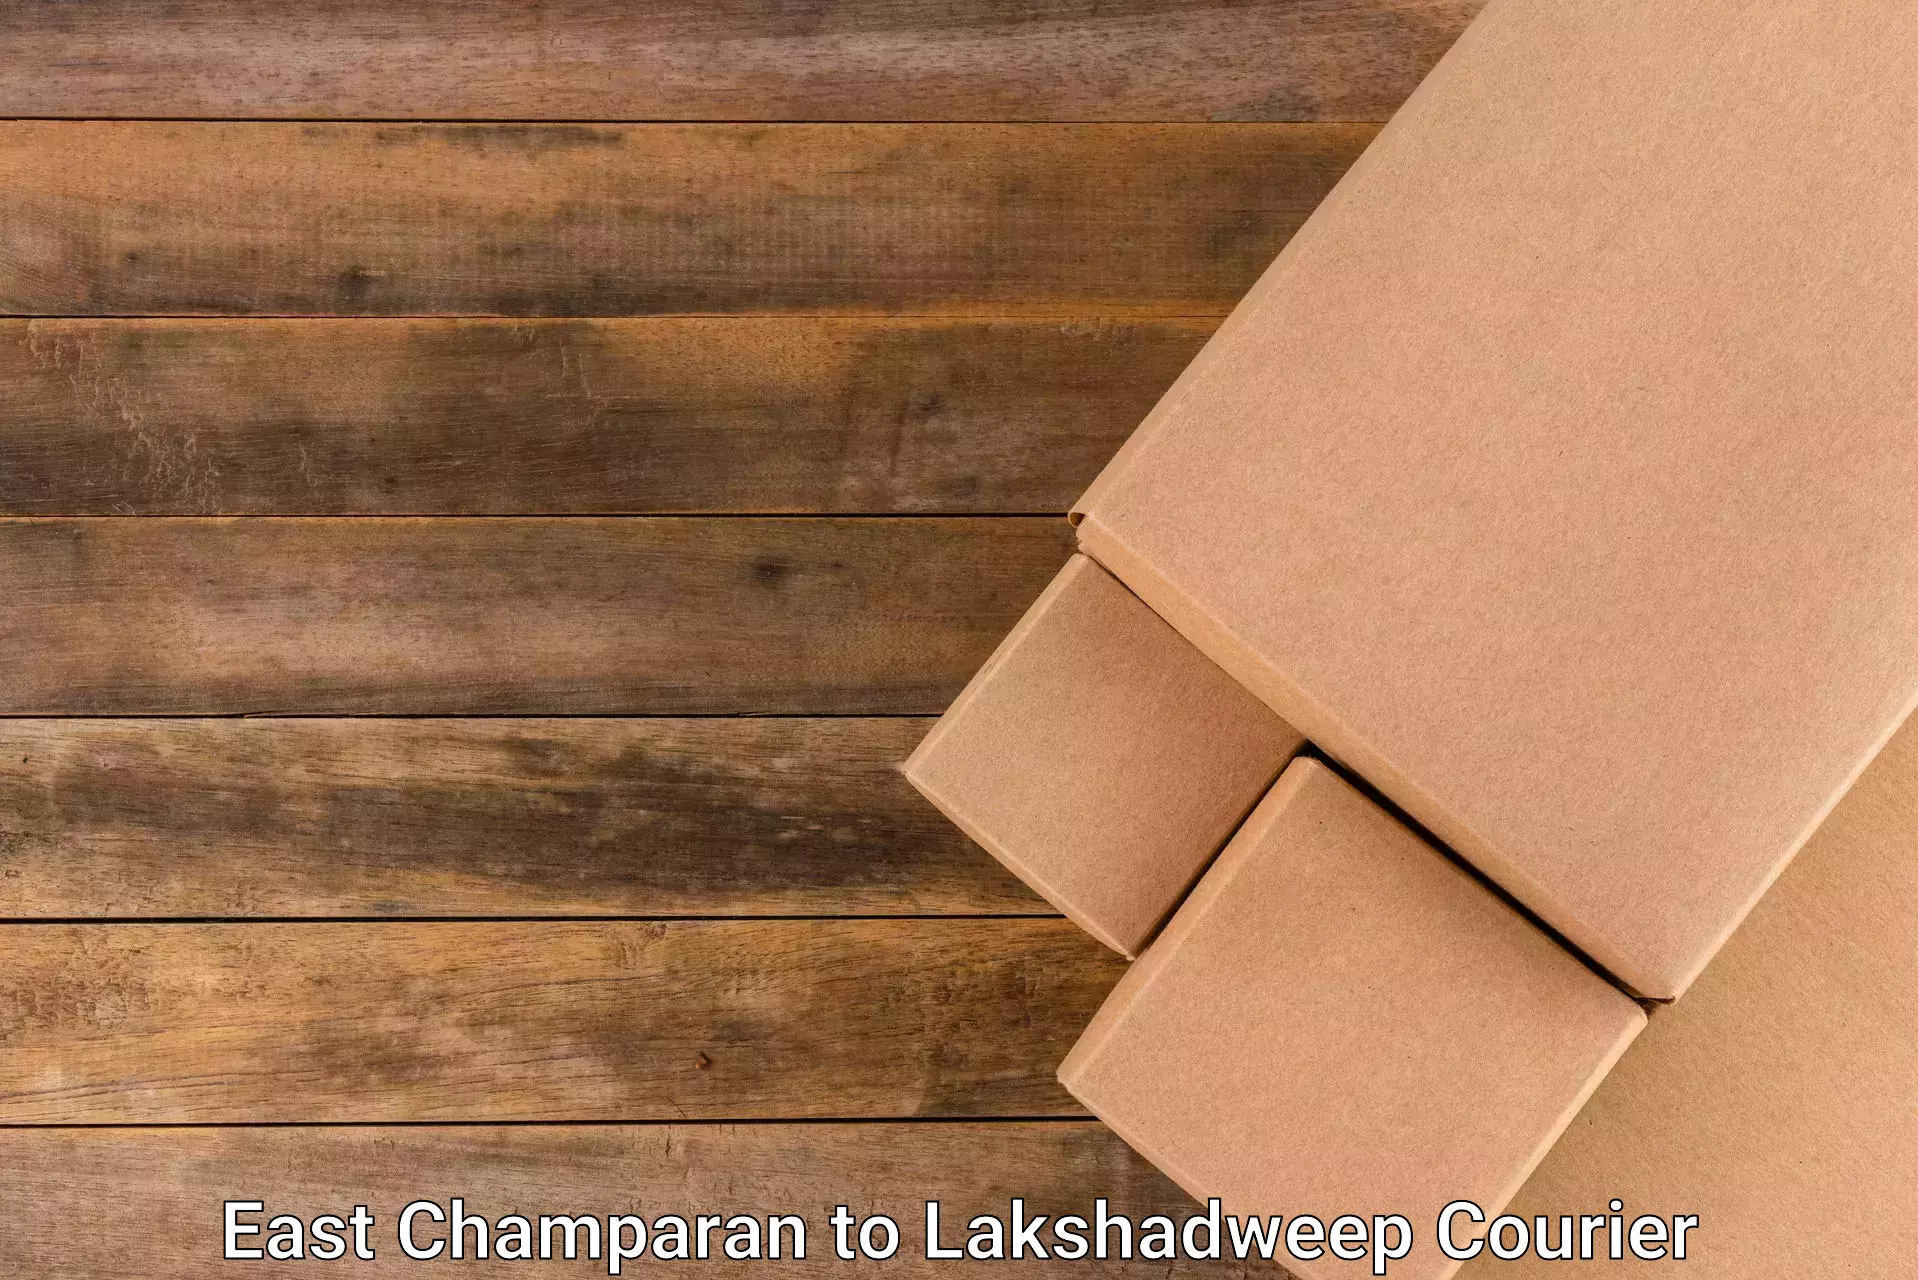 Specialized shipment handling East Champaran to Lakshadweep